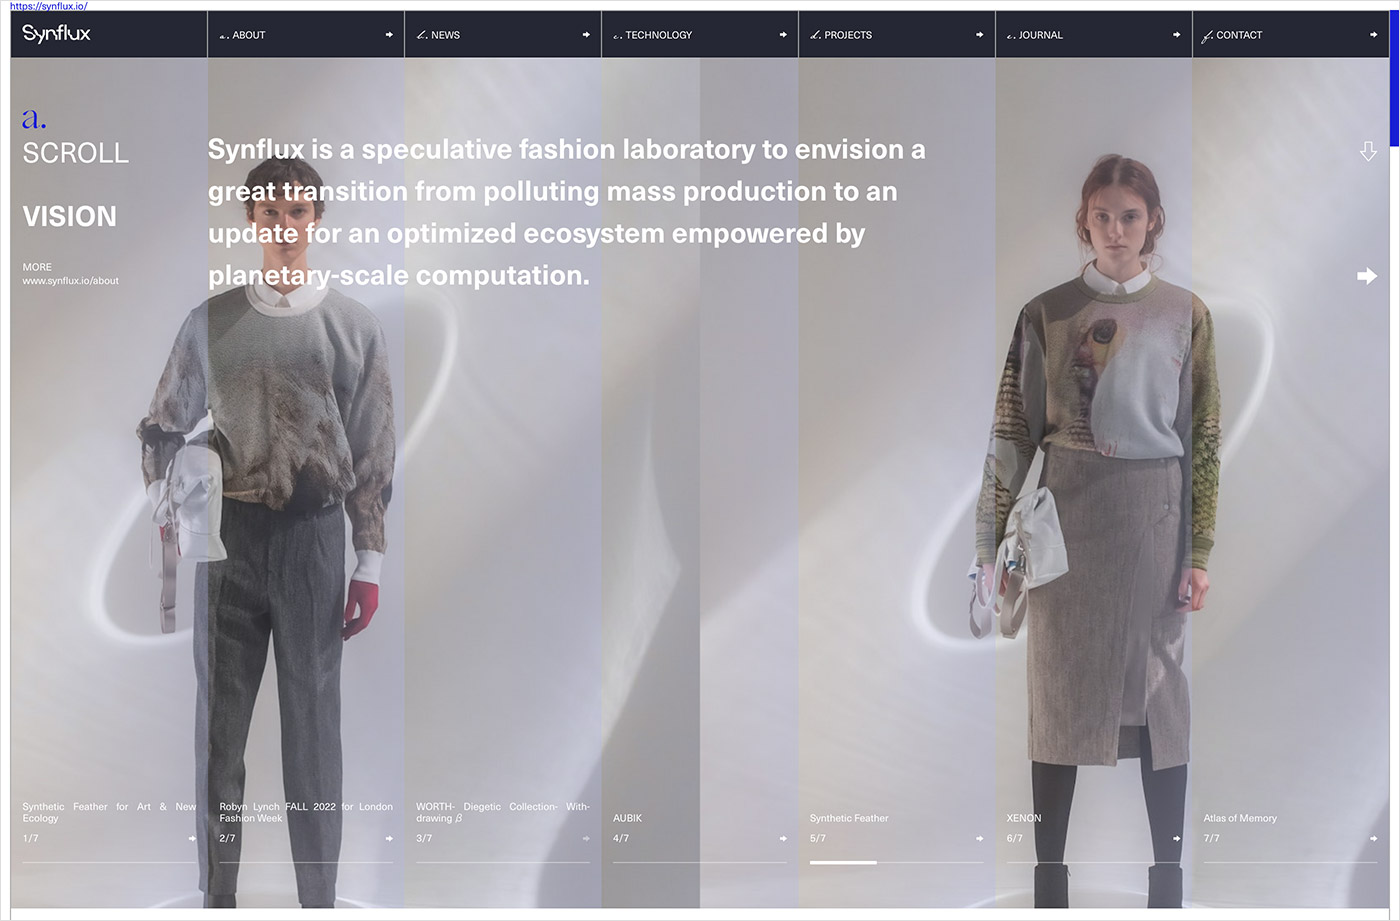 Synflux – A Speculative Fashion Laboratory based in Tokyoウェブサイトの画面キャプチャ画像